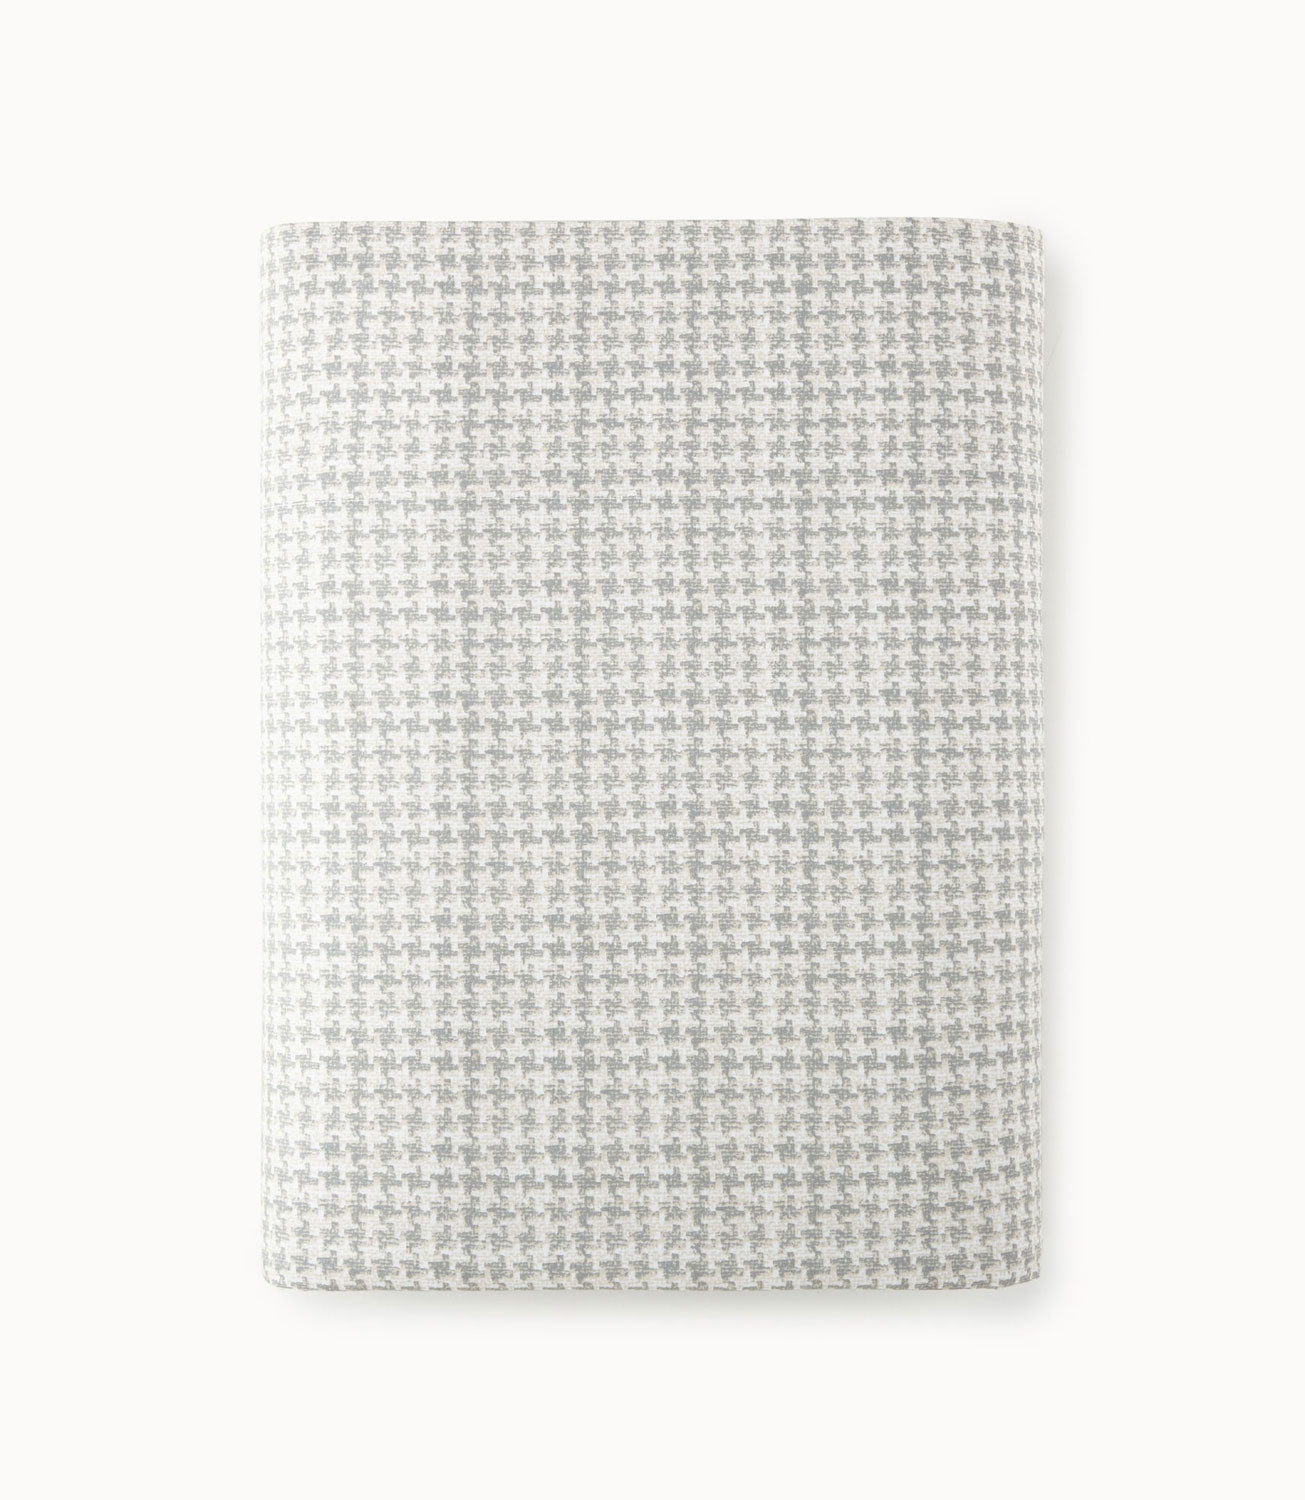 Houndstooth Percale Flat Sheet Greige